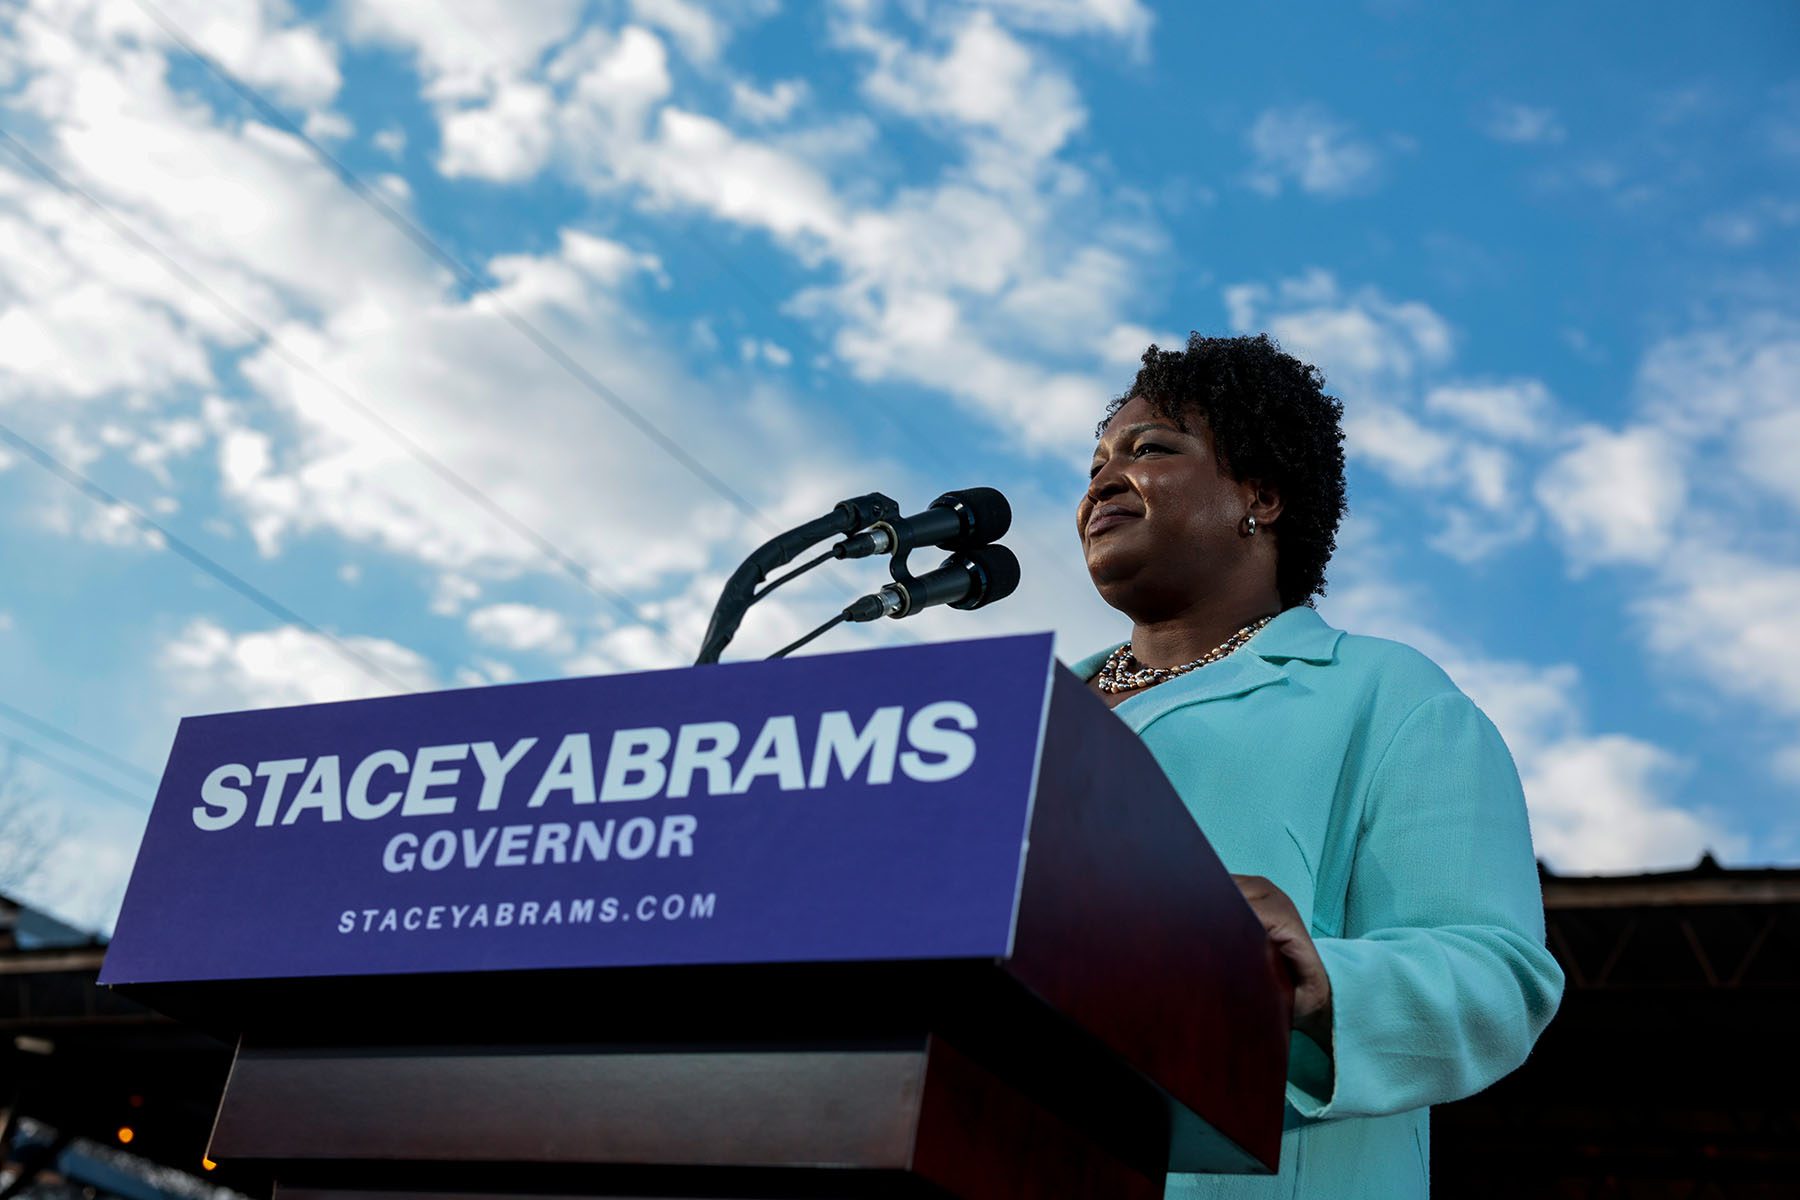 Stacey Abrams speaks from a podium during a campaign rally.